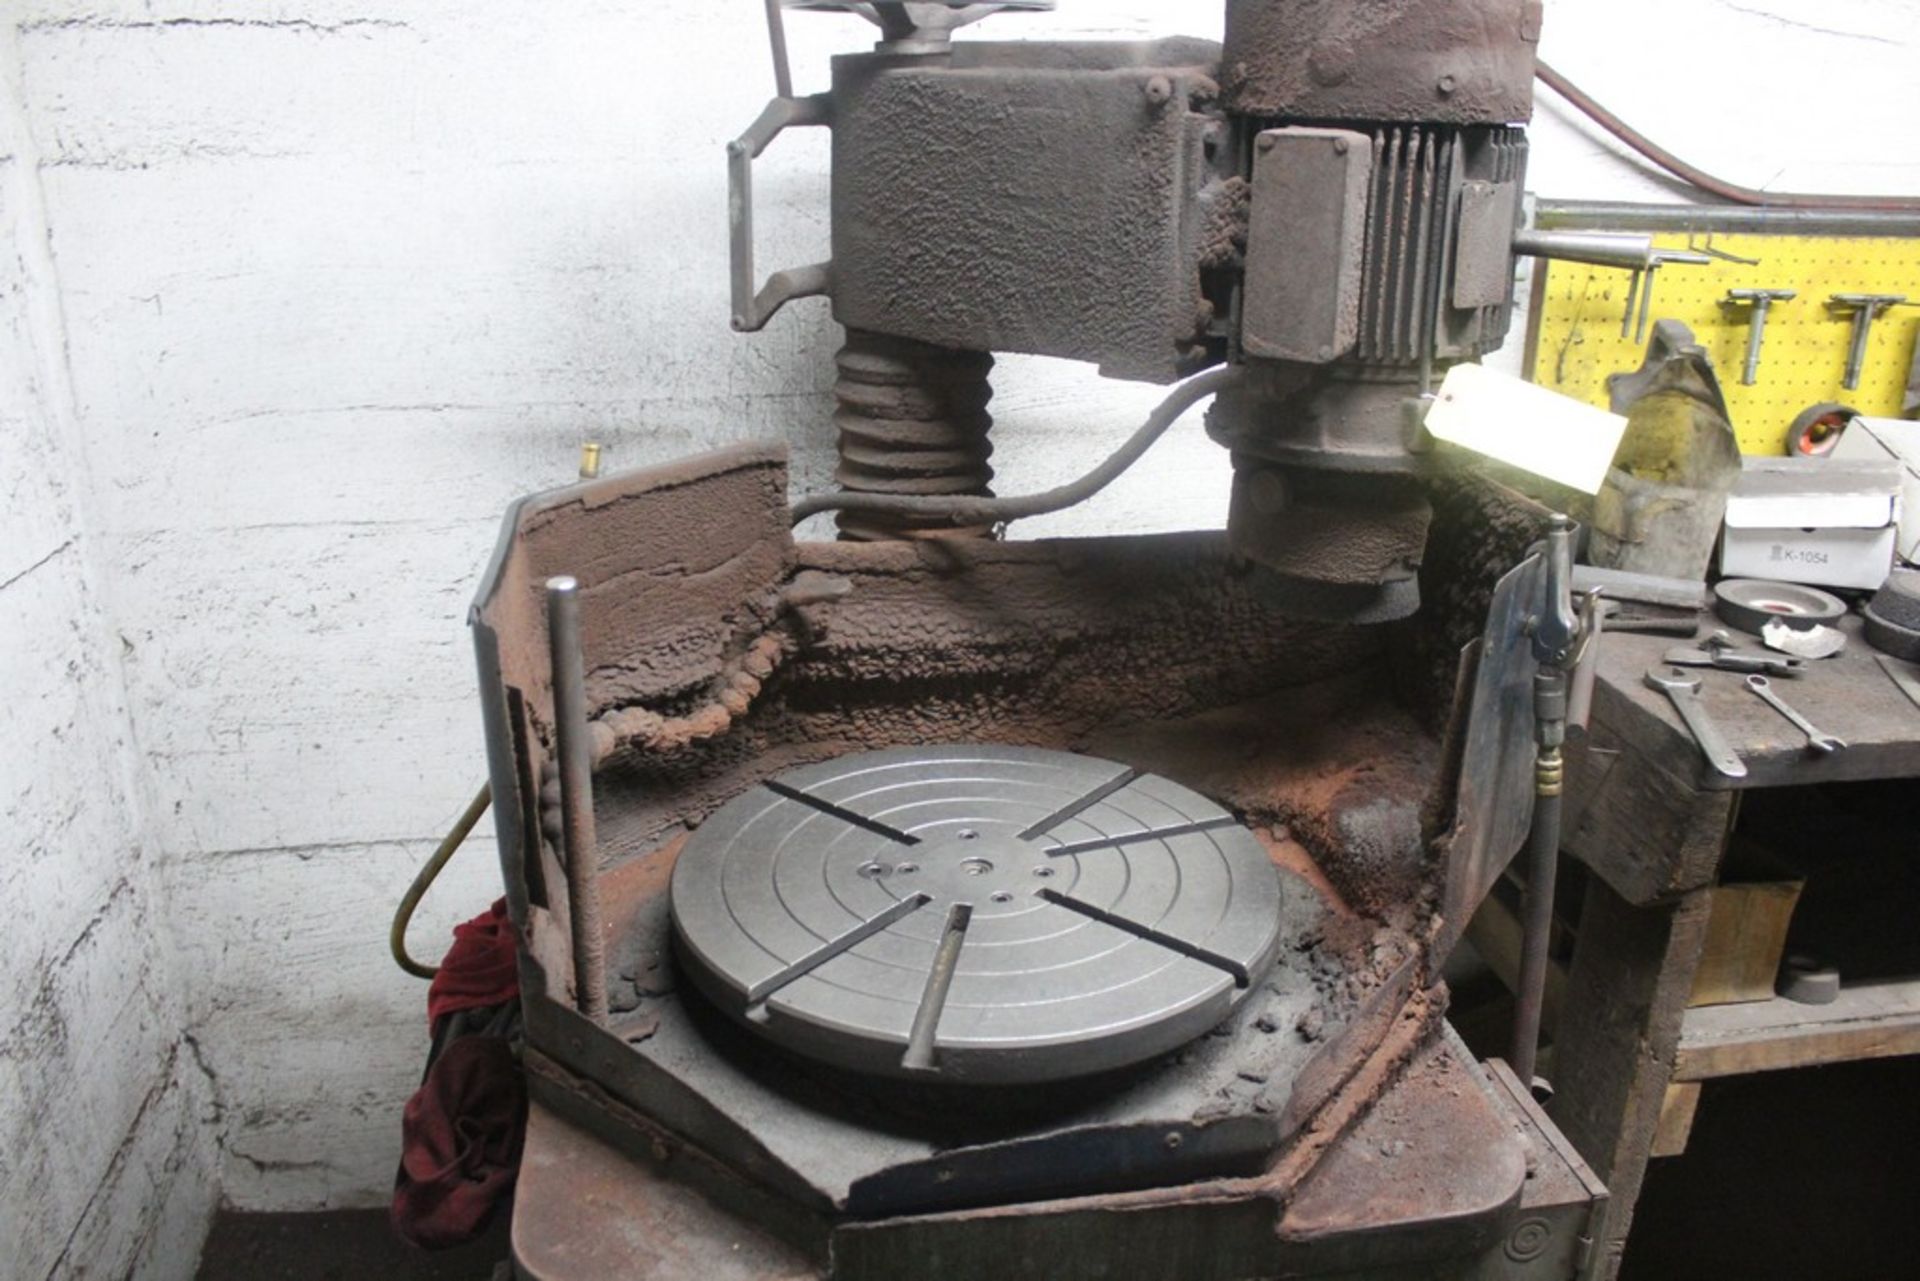 WINONA VAN NORMAN 18" ROTARY TABLE GRINDER - Image 2 of 4